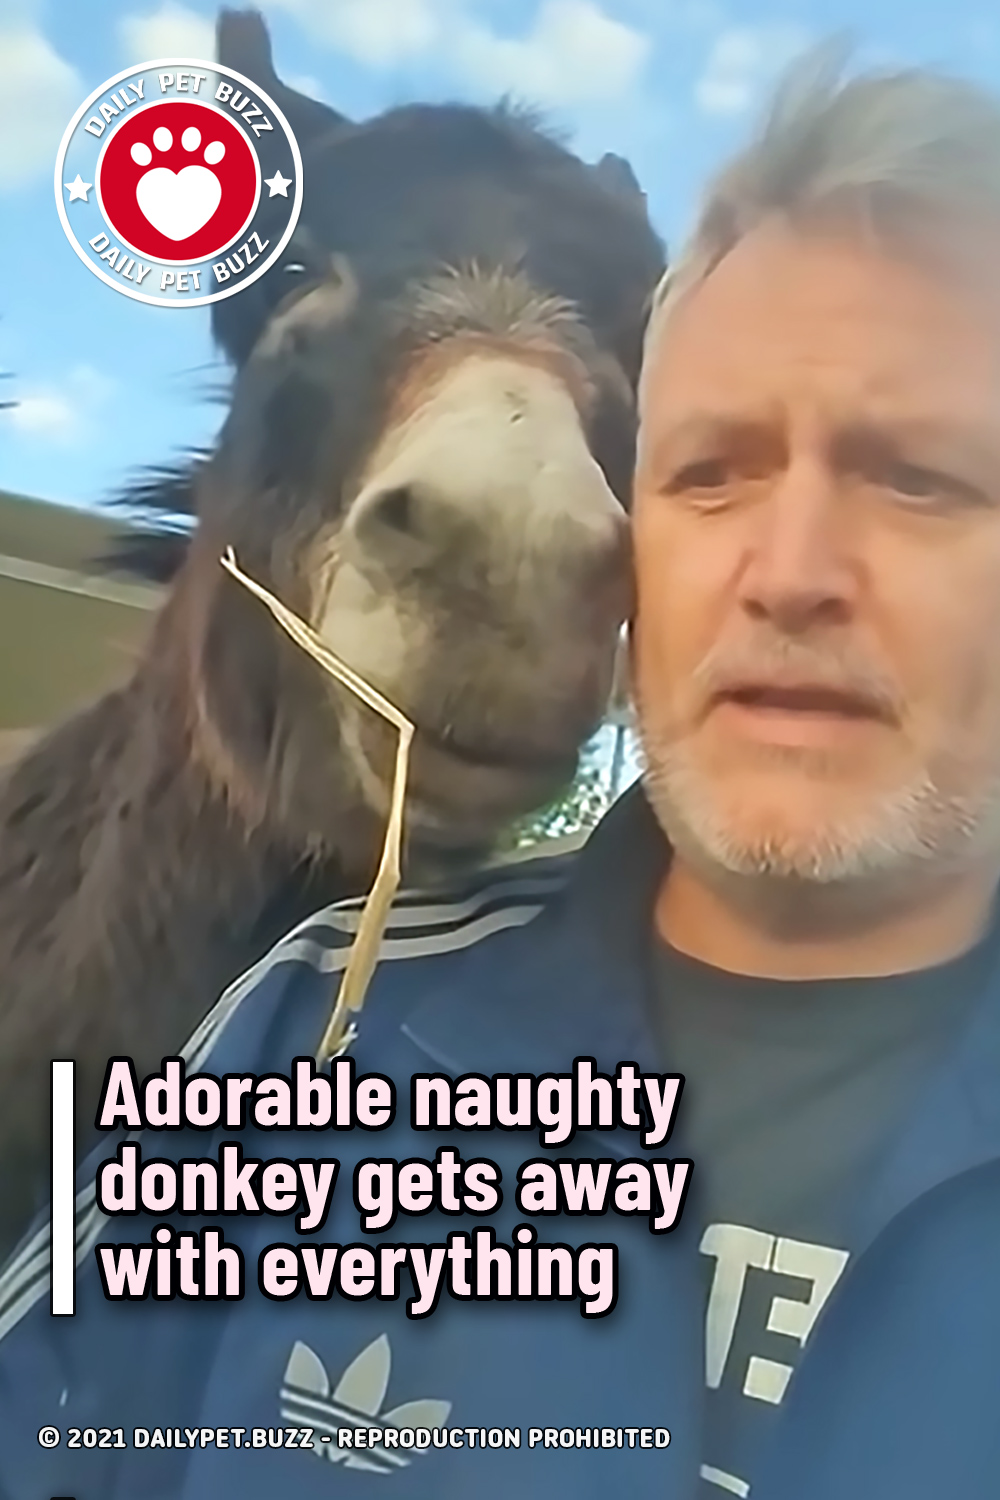 Adorable naughty donkey gets away with everything